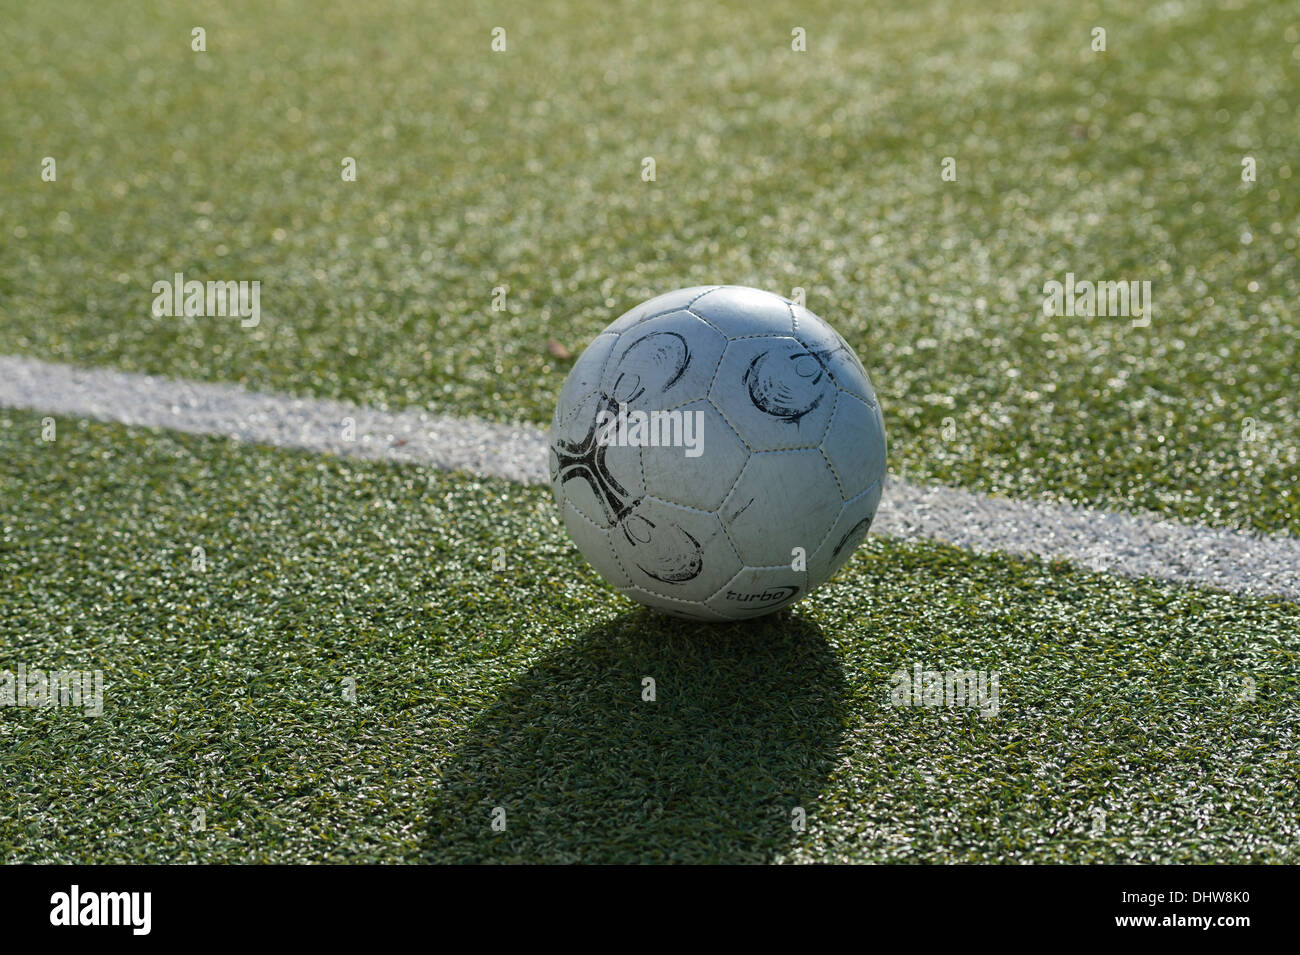 Football on all weather Astro Turf pitch Stock Photo